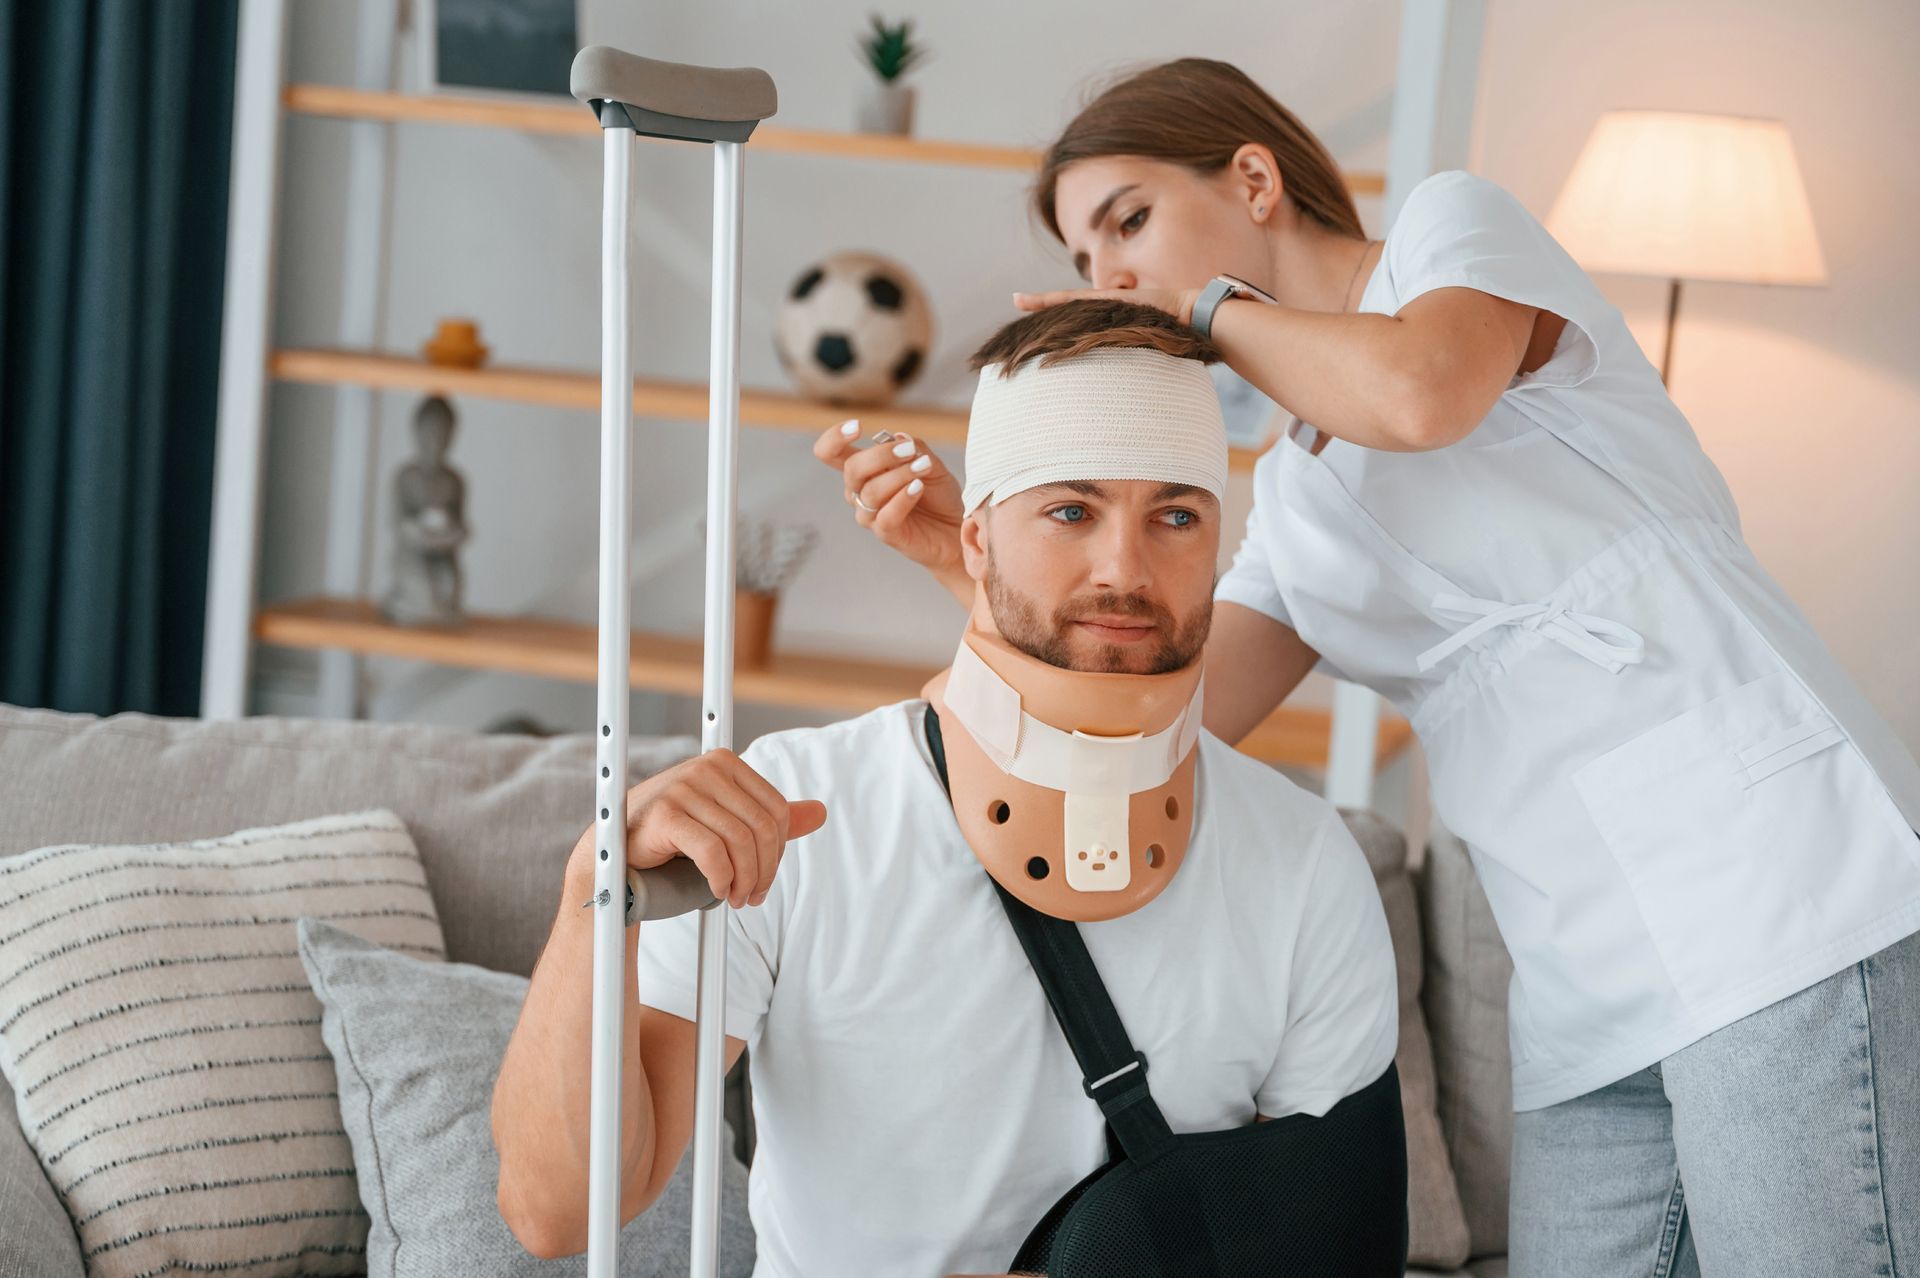 A nurse cleaning bandage on a man's head